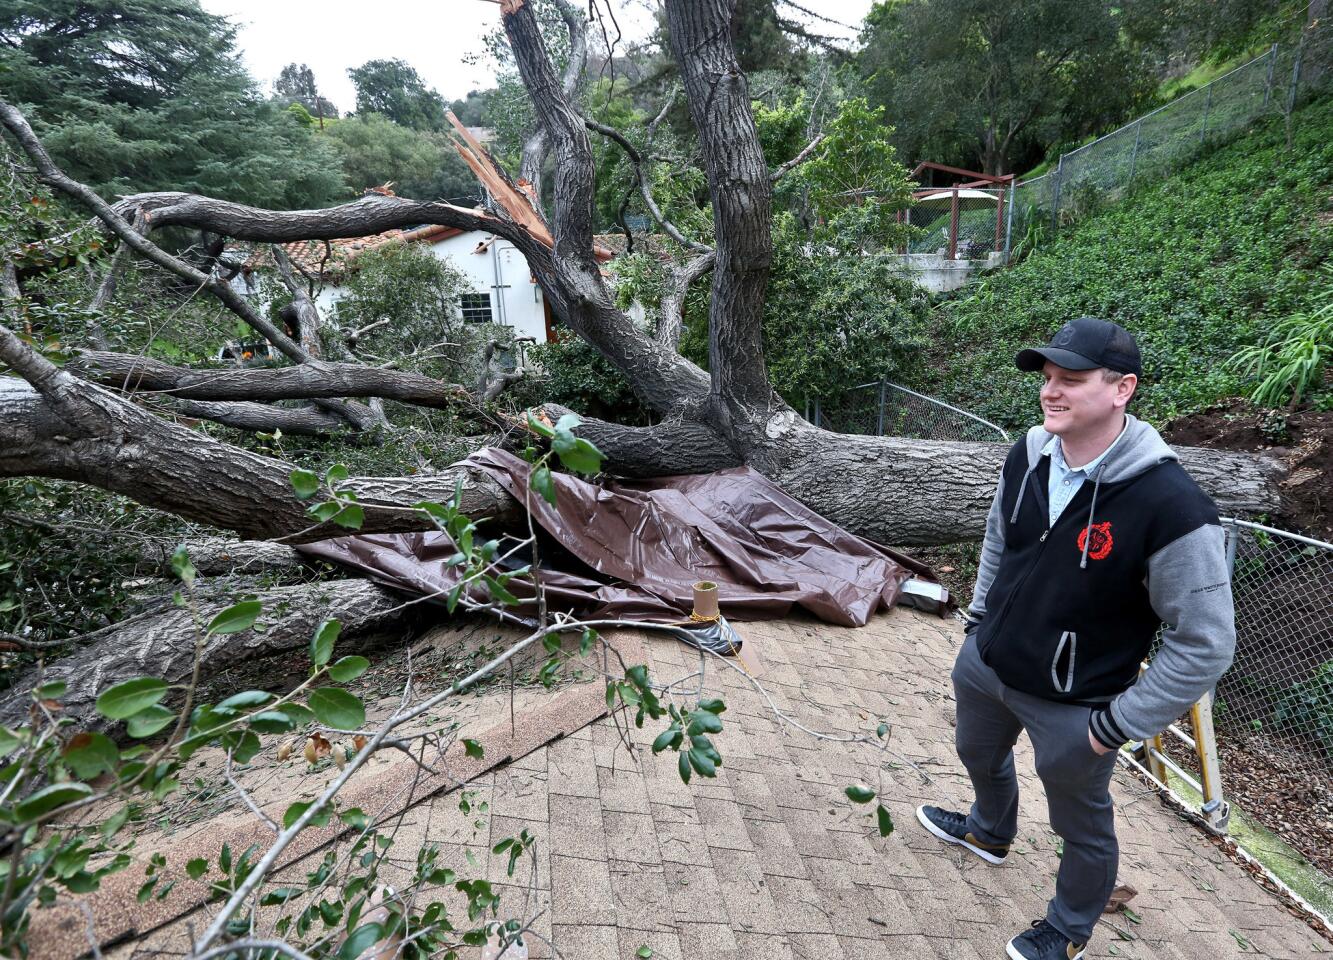 Homeowner Brant Malan stands on the roof of his home where a large old oak fell onto the roof the day before, on the 2400 block of Bywood Dr. in Glendale on Friday, Feb. 15, 2019. The tree, estimated to be around 80-100 years old, fell while Malan, his wife and young child were away. Malan said that as long as everyone is safe, material things can be replaced.